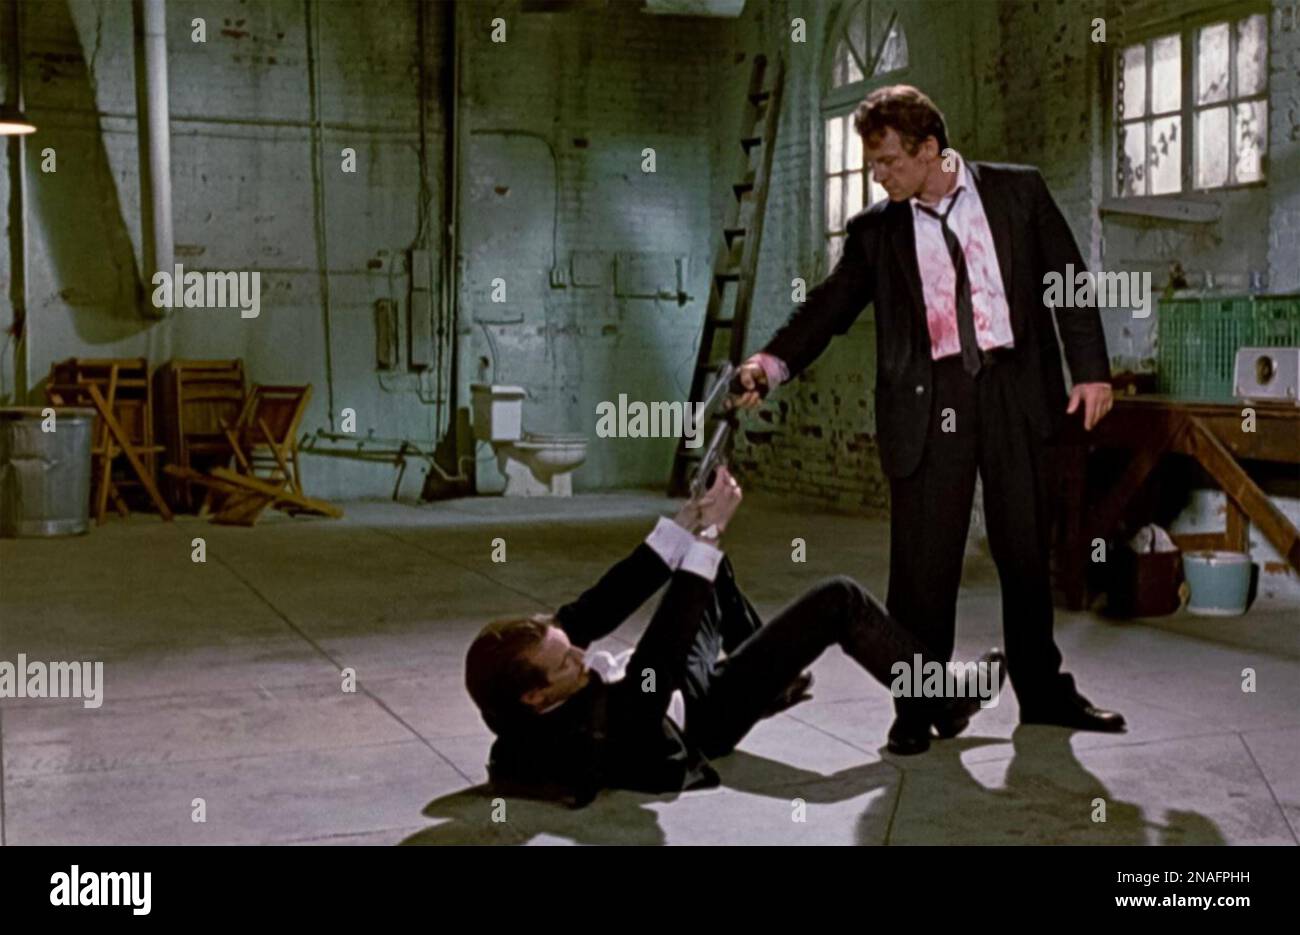 Reservoir Dogs (1992), Steve Buscemi (Mr. Pink). Hey, why …